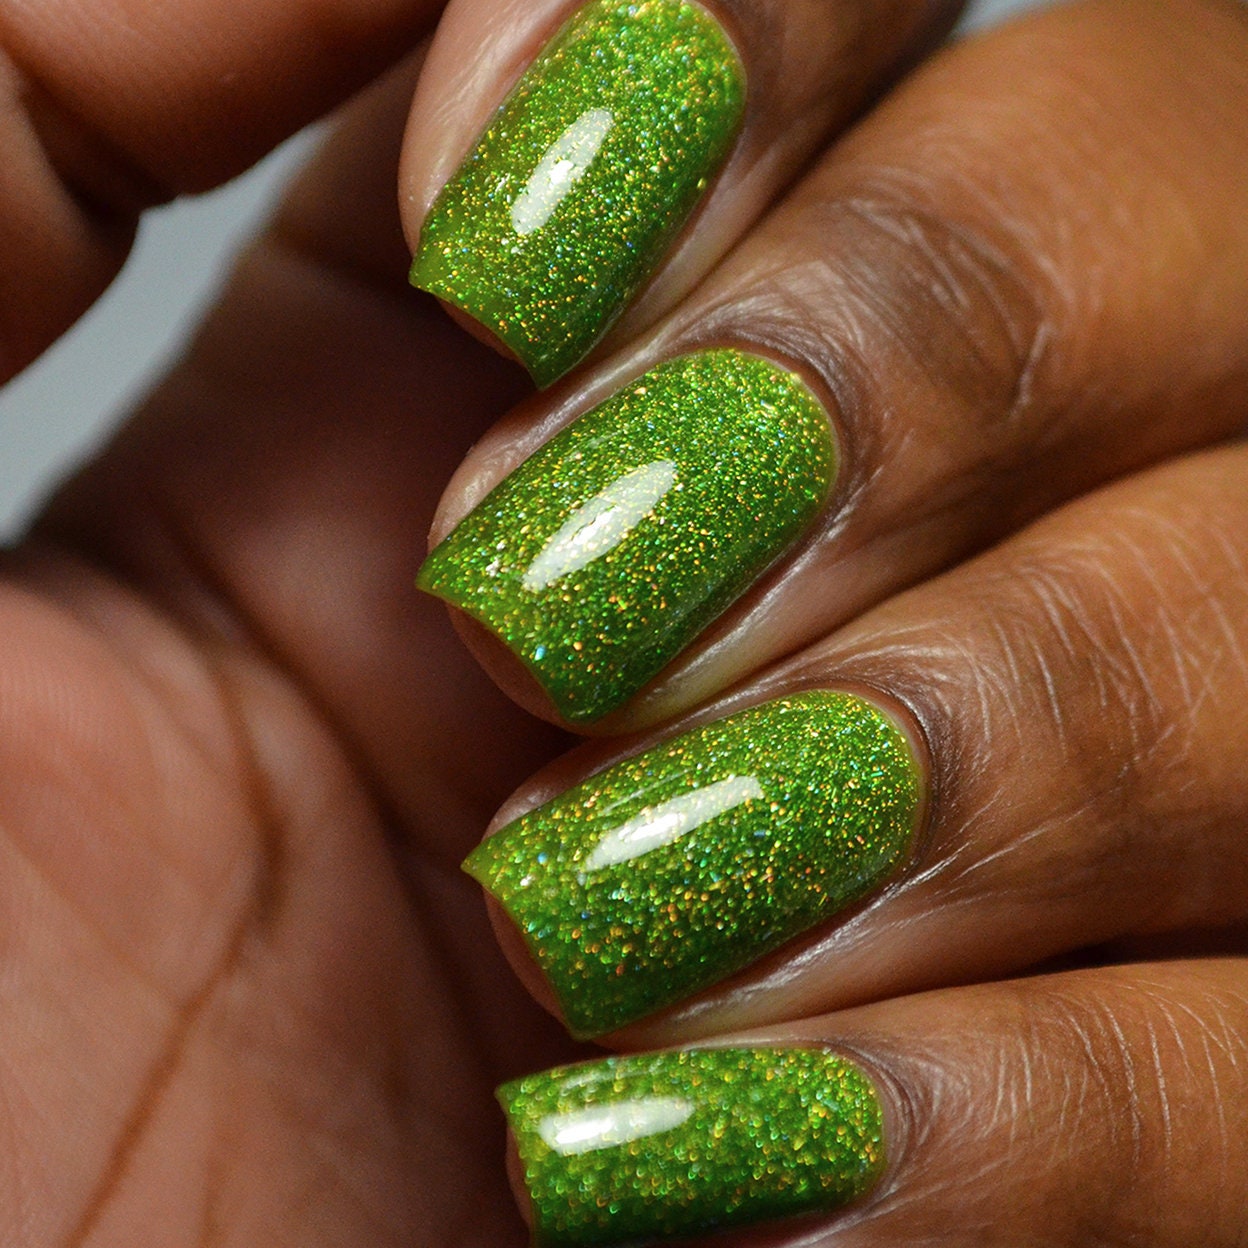 Electric Lime Shine Iridescent Nail Glitter For Nail Art (15gm Bag)